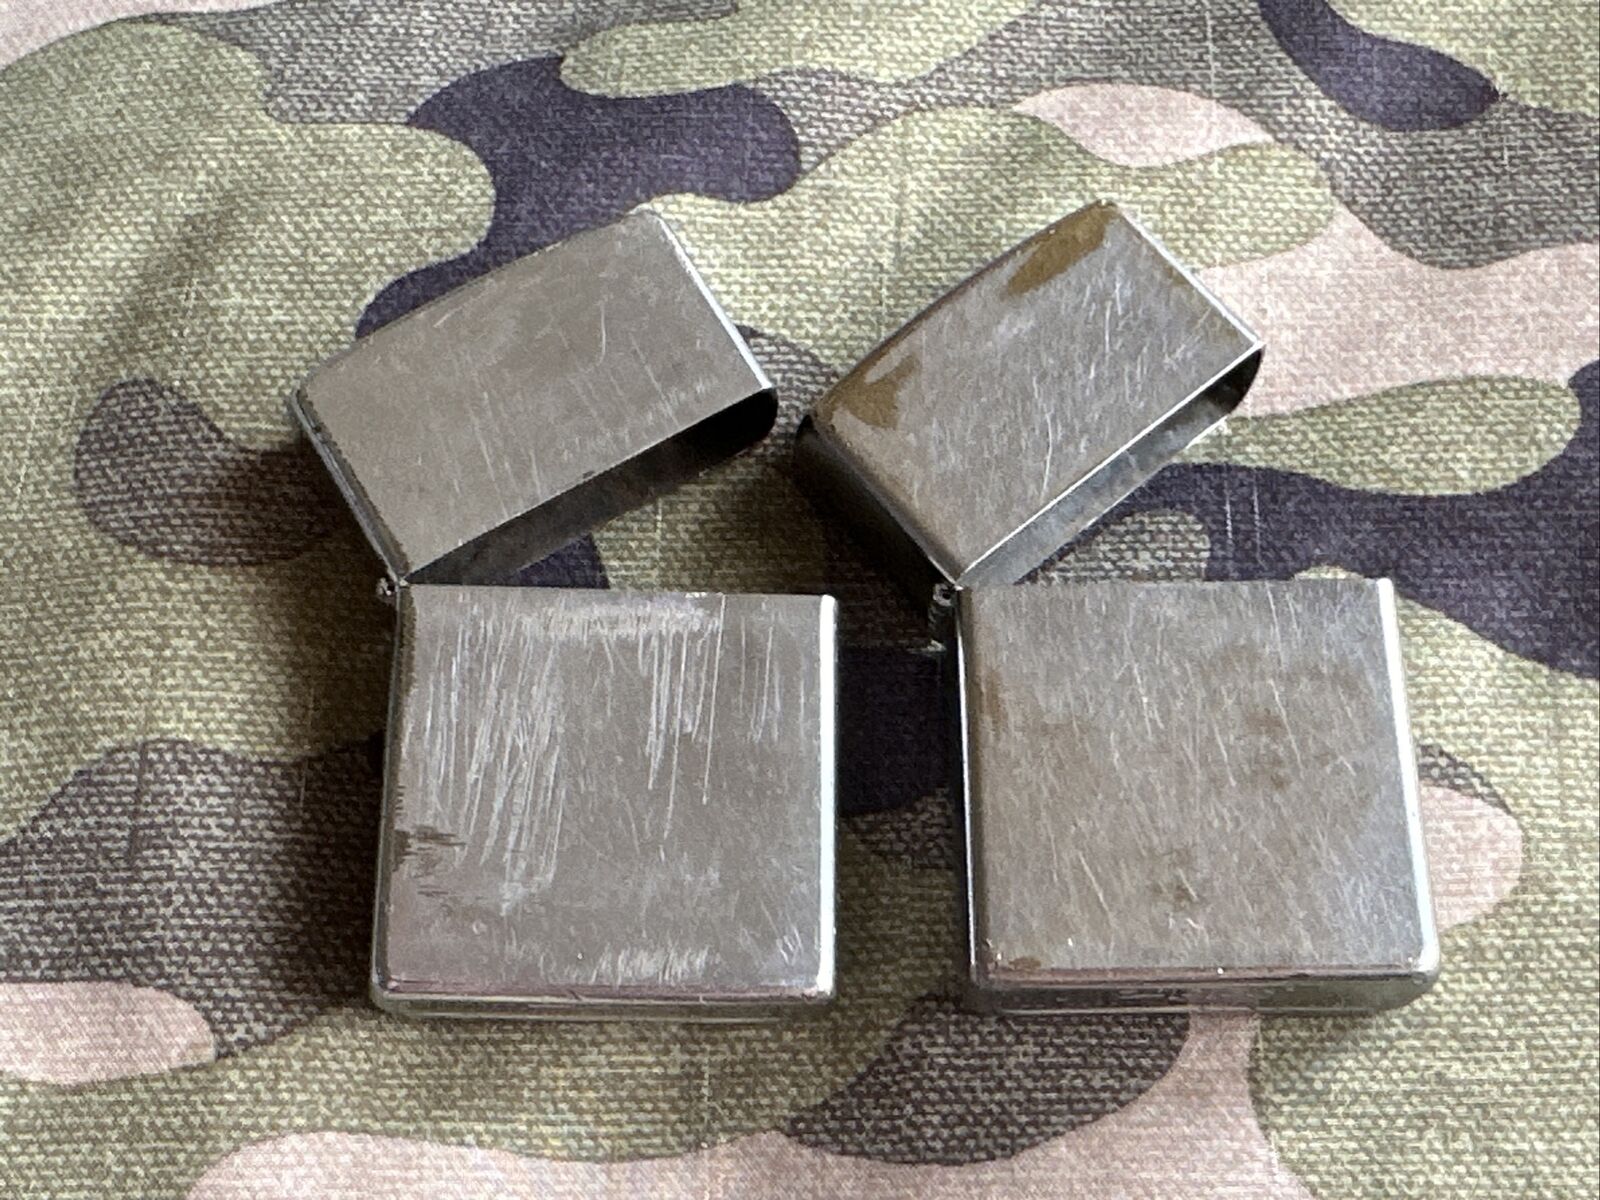 Lot of 2 Zippo Lighter Cases Only - 1999 & 2011 Silver Chrome Cases